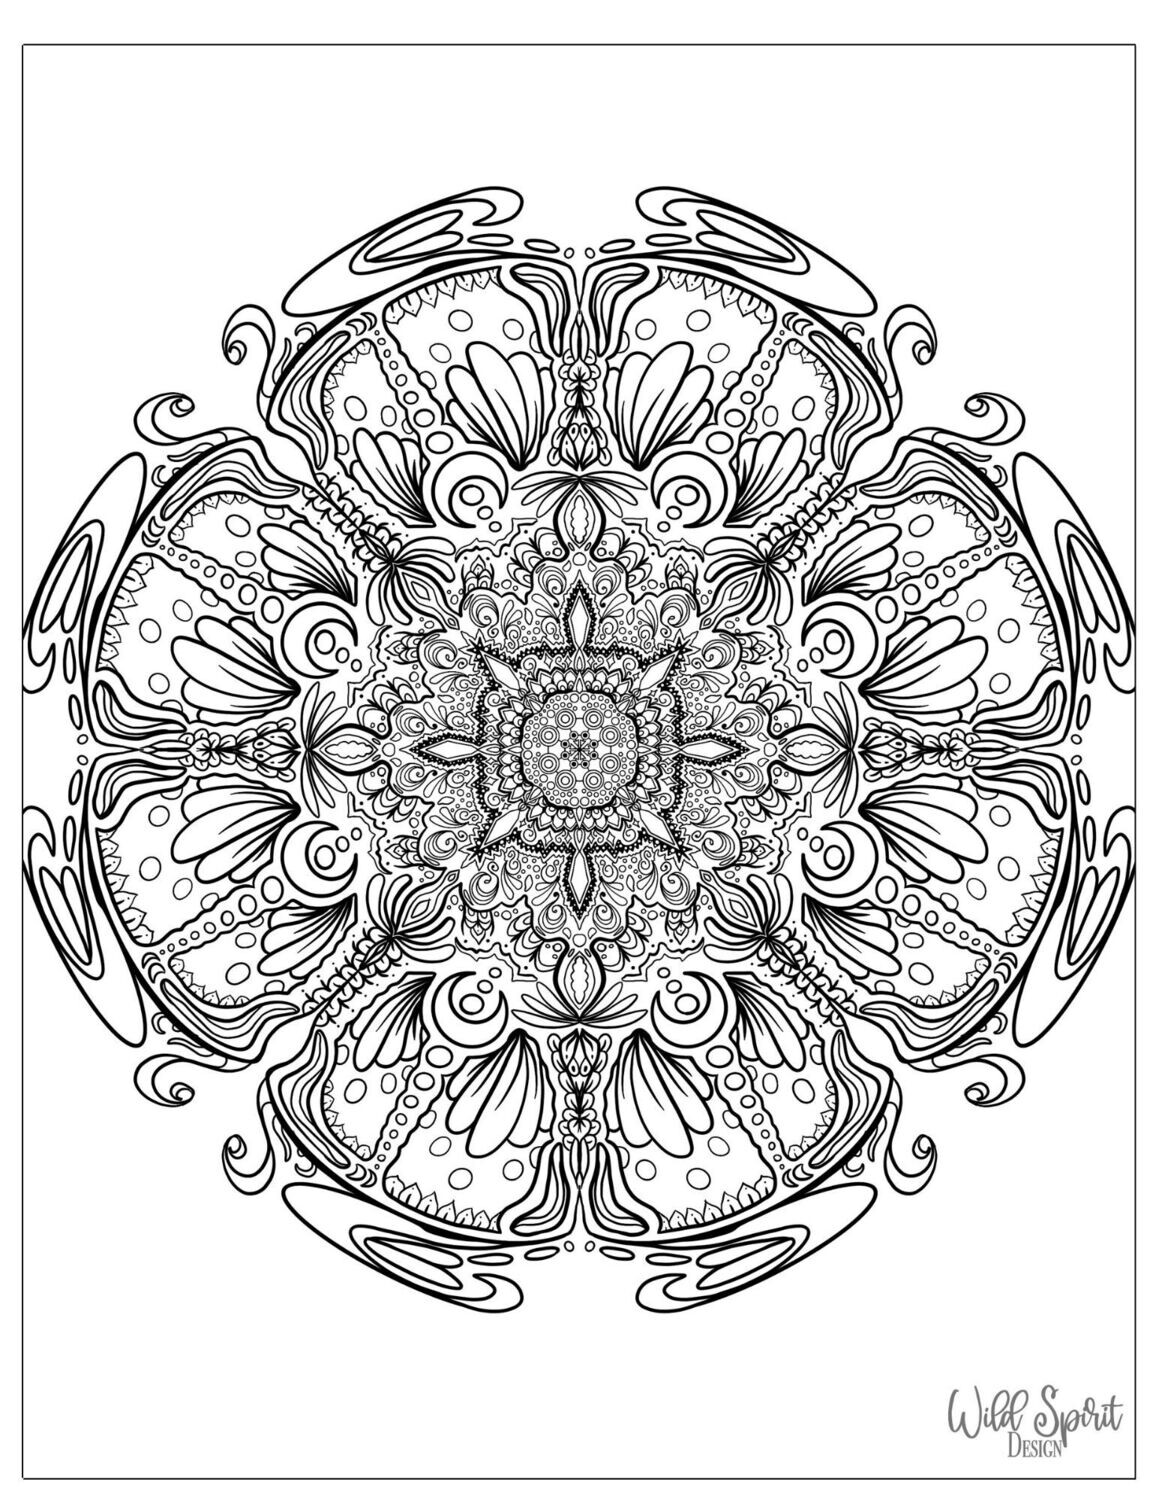 Mandala Style 8, Zen Tangle Coloring Page, Digital Download, Floral